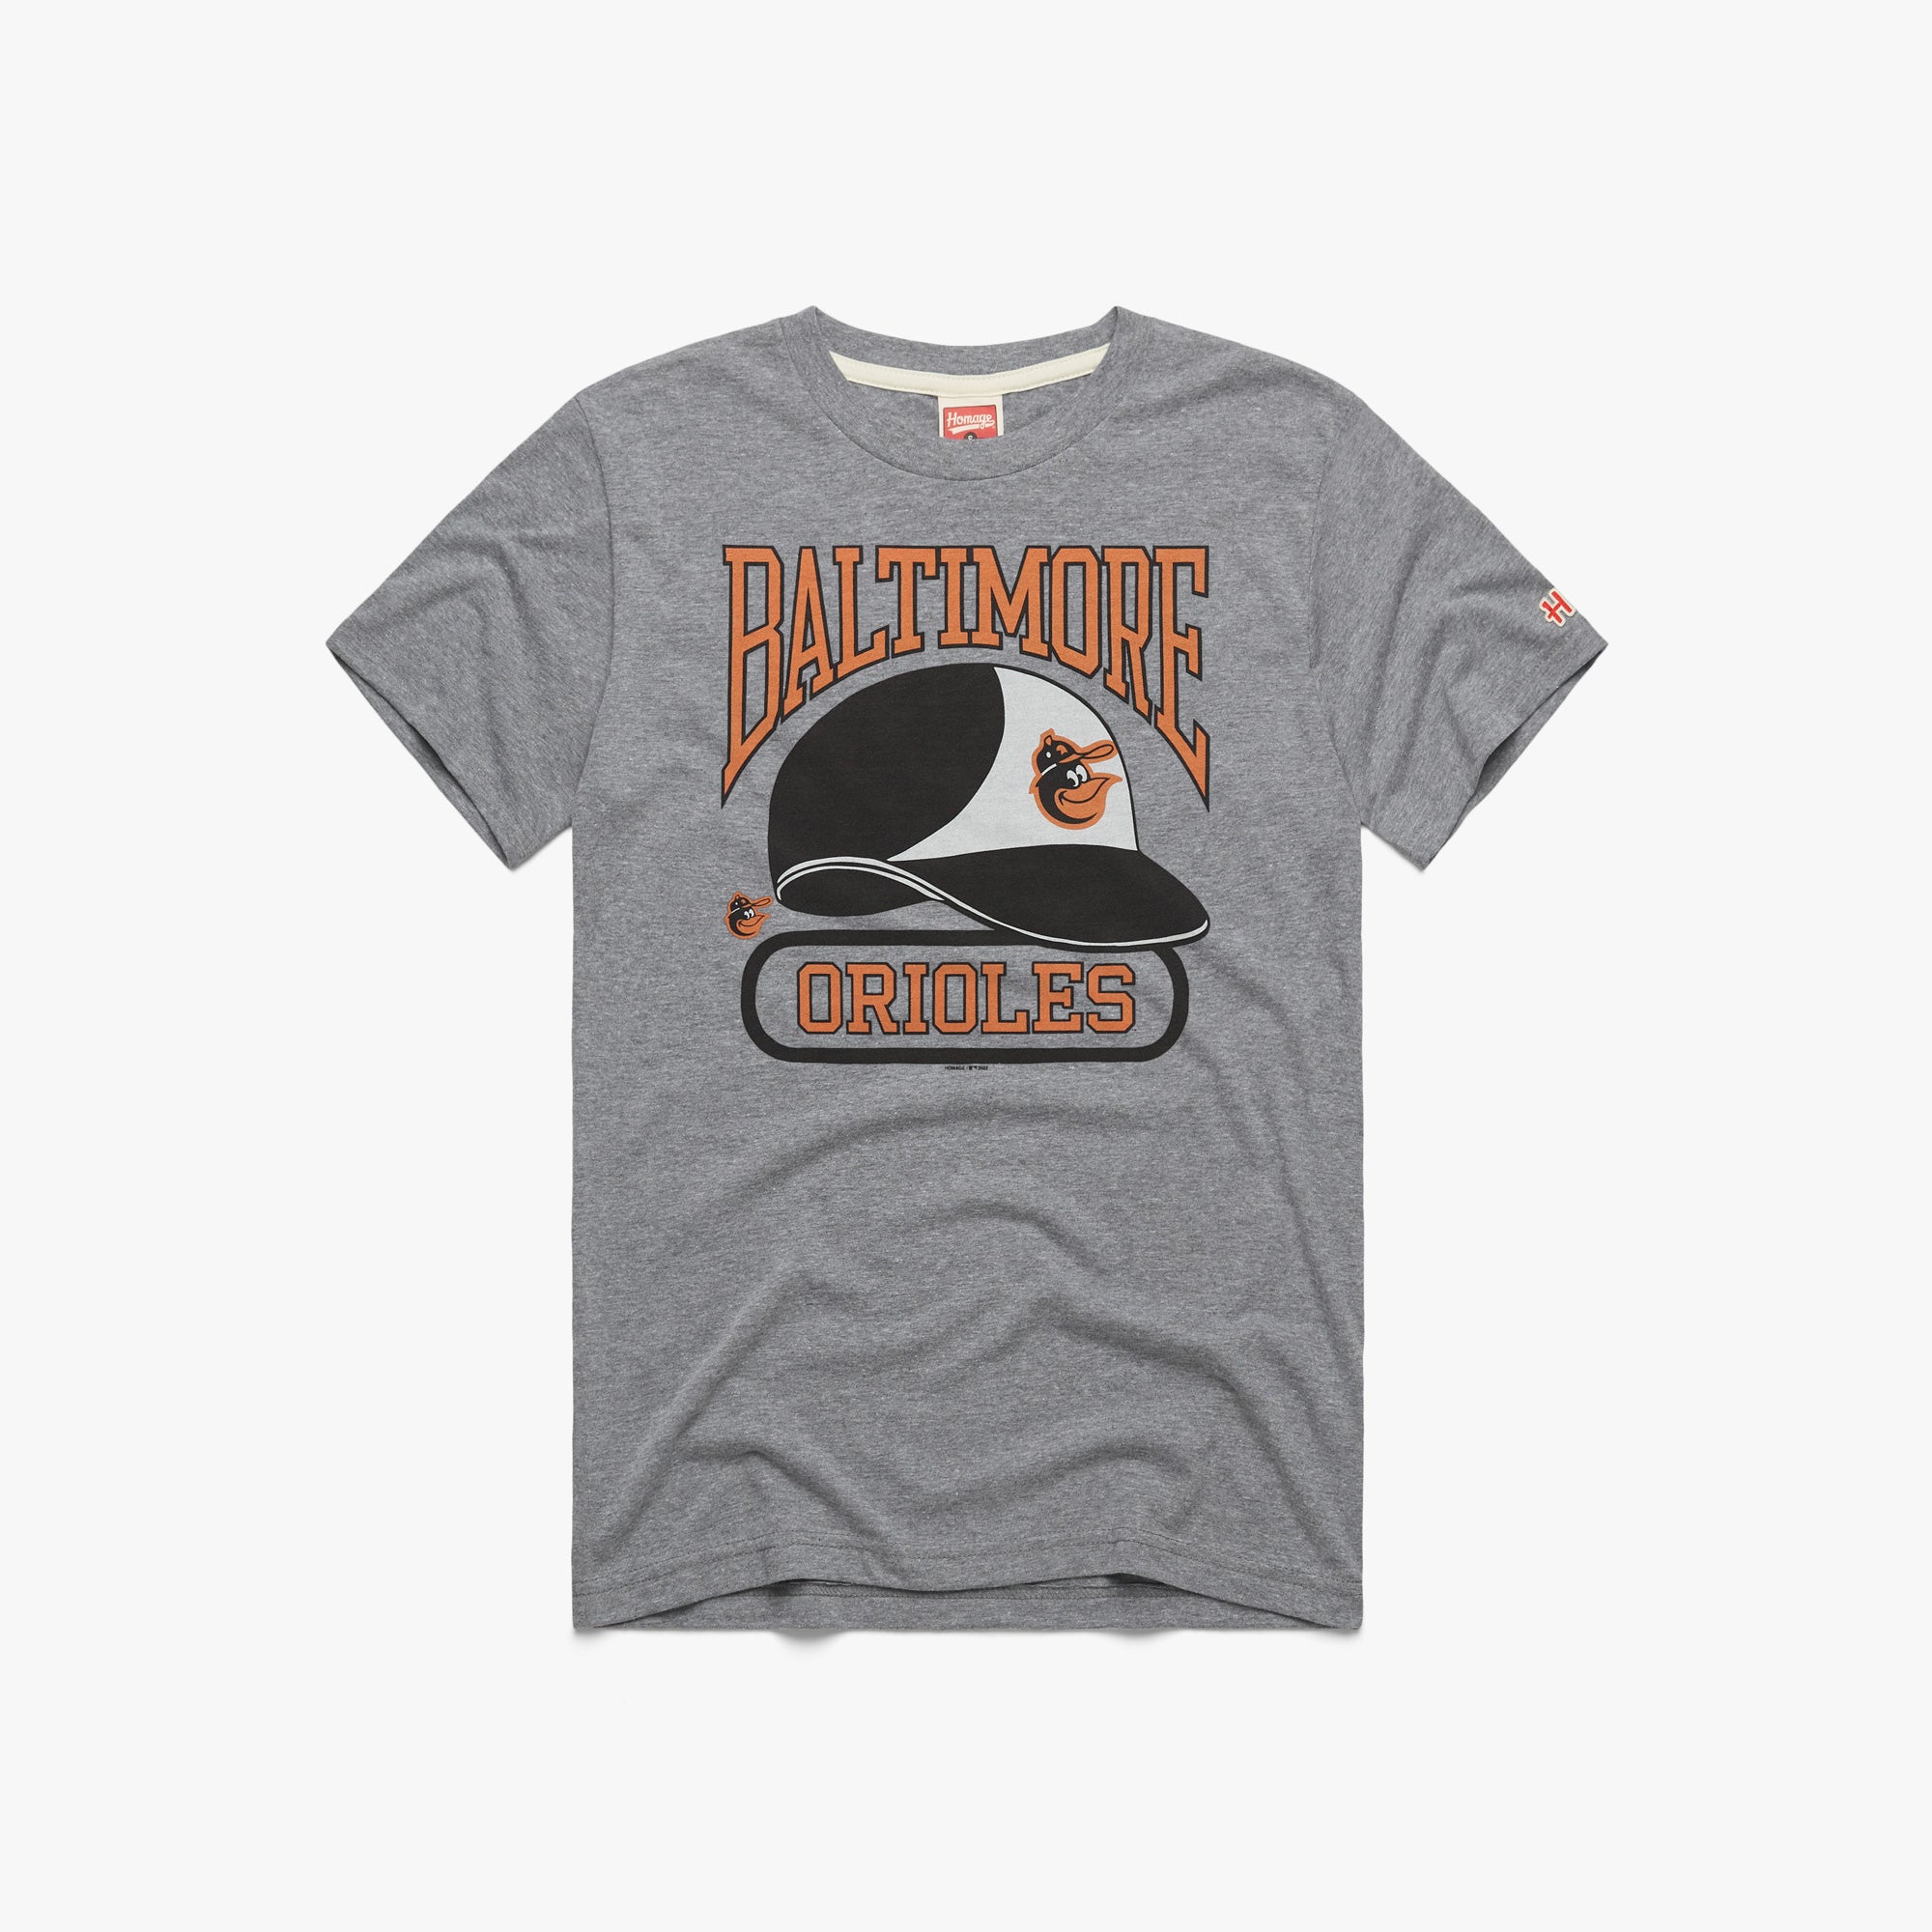 Baltimore Orioles Helmet T-Shirt from Homage. | Grey | Vintage Apparel from Homage.